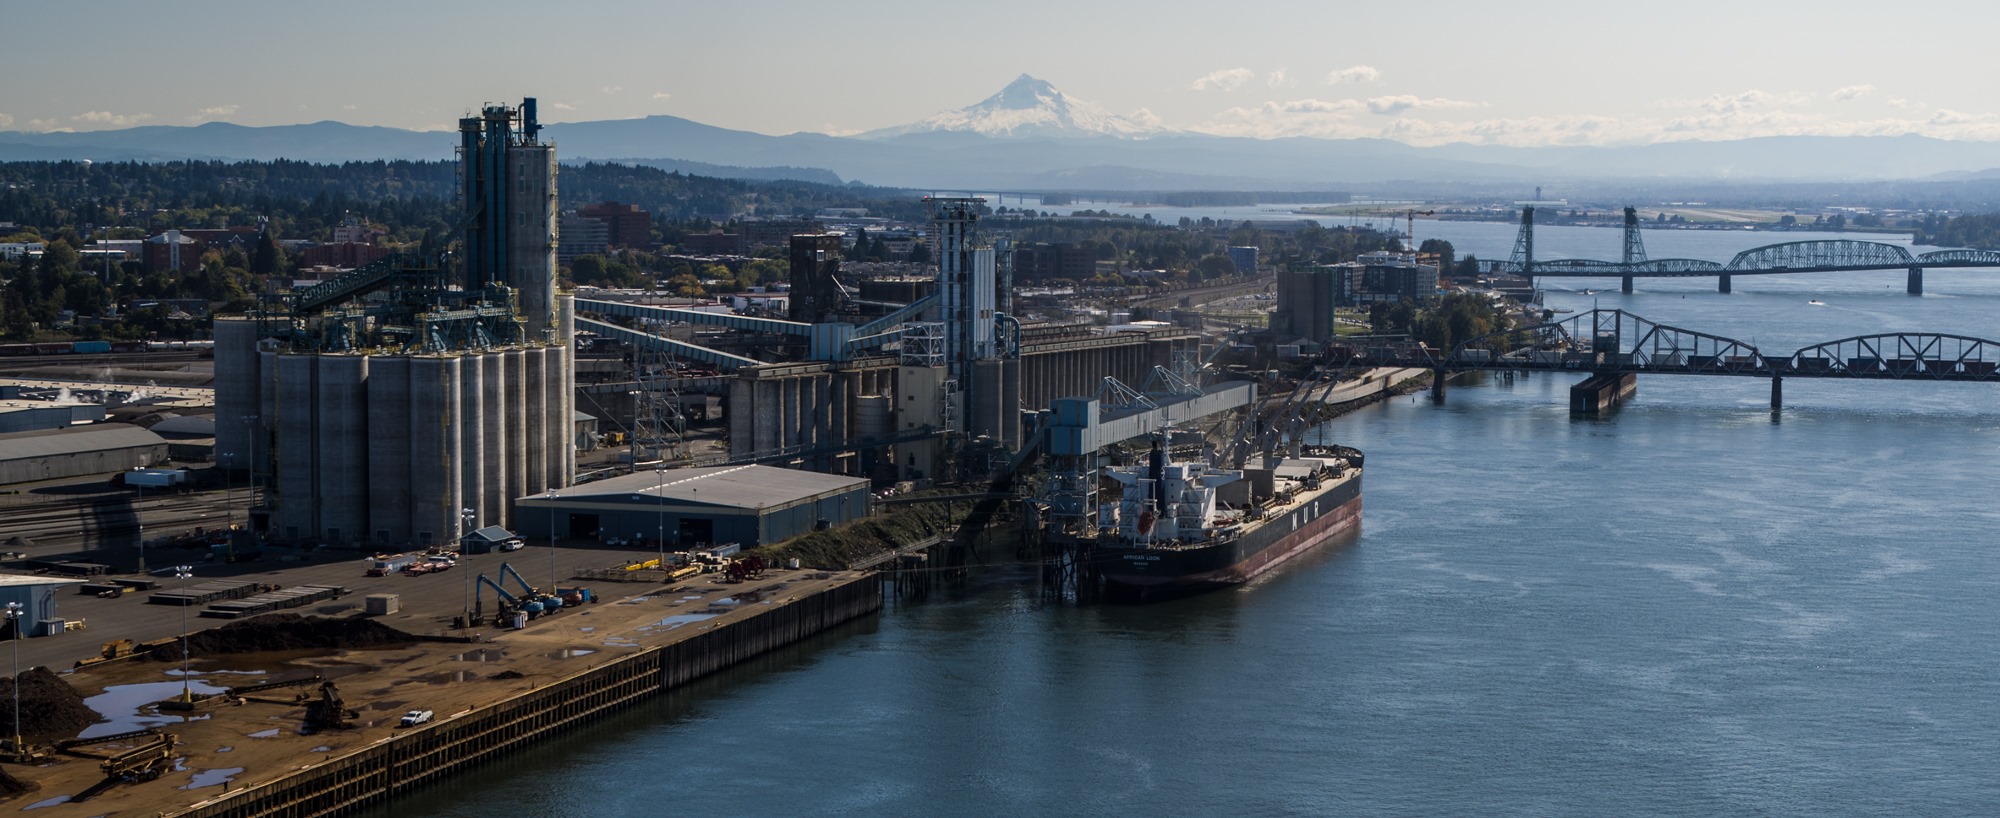 Photo shows a bulk ship at anchor at an export elevator in the Pacific Northwest helping illustrate wheat export basis and competitiveness